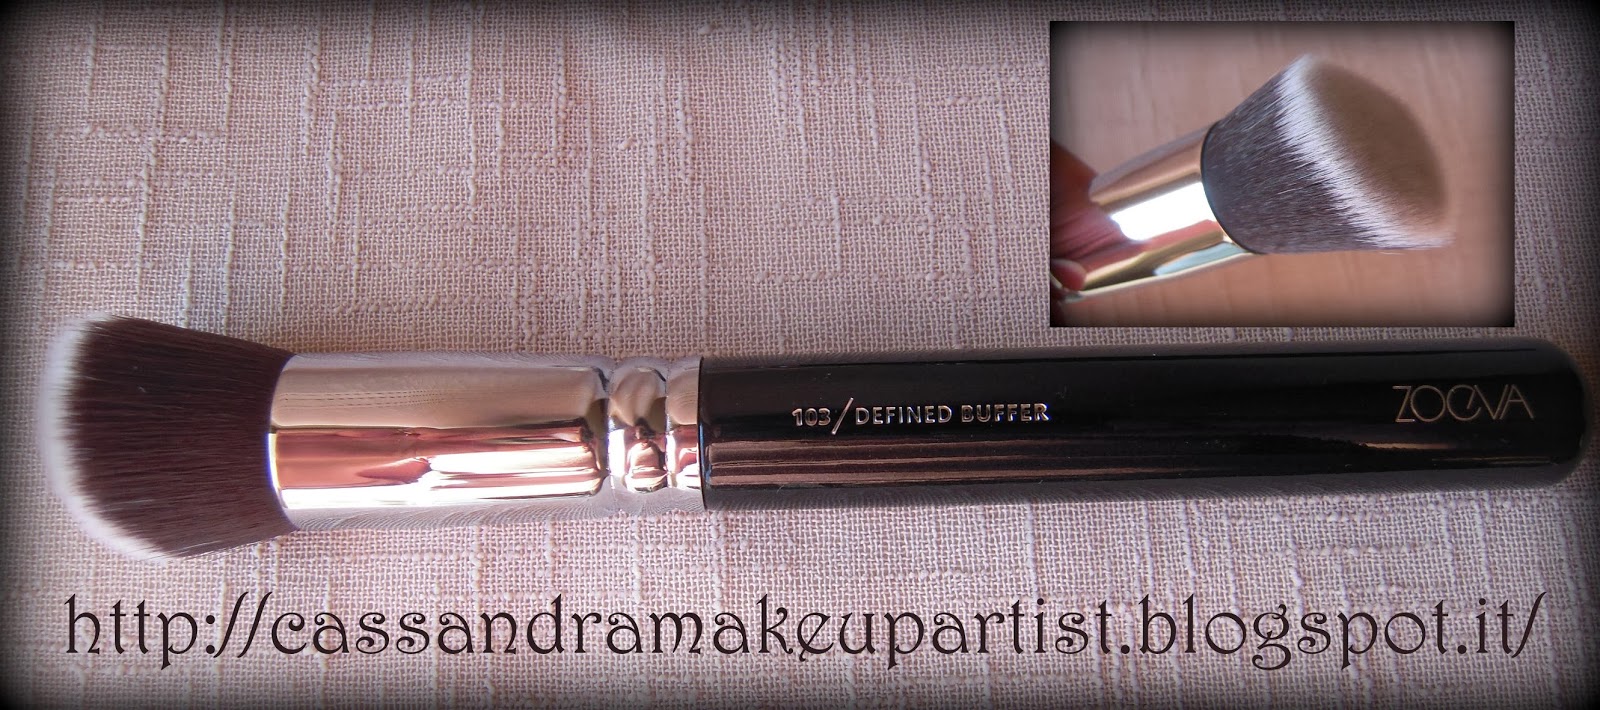 ZOEVA - Nuovi Pennelli 2014 - brush clutch - 100 Luxe Face Finish - 103 Defined Buffer - 105 Luxe Highlight - 109 Face Paint - 126 Luxe Cheek Finish - 221 Luxe Soft Crease - 224 Luxe Defined Crease - 322 Brow Line - review - recensione - prezzo - price -  